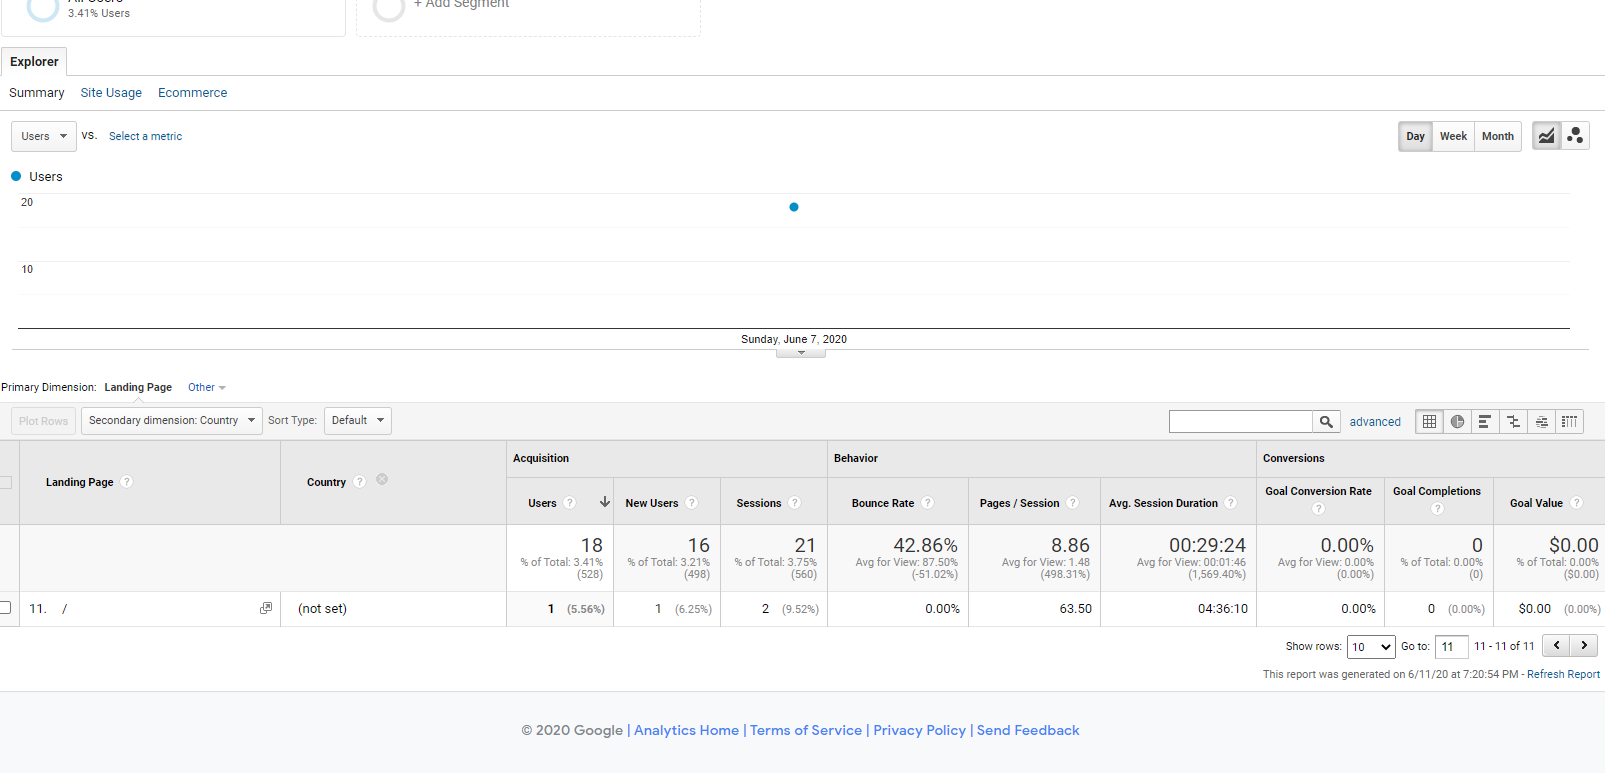 How To Block Direct Spam Traffic in Google Analytics with Advanced Filters